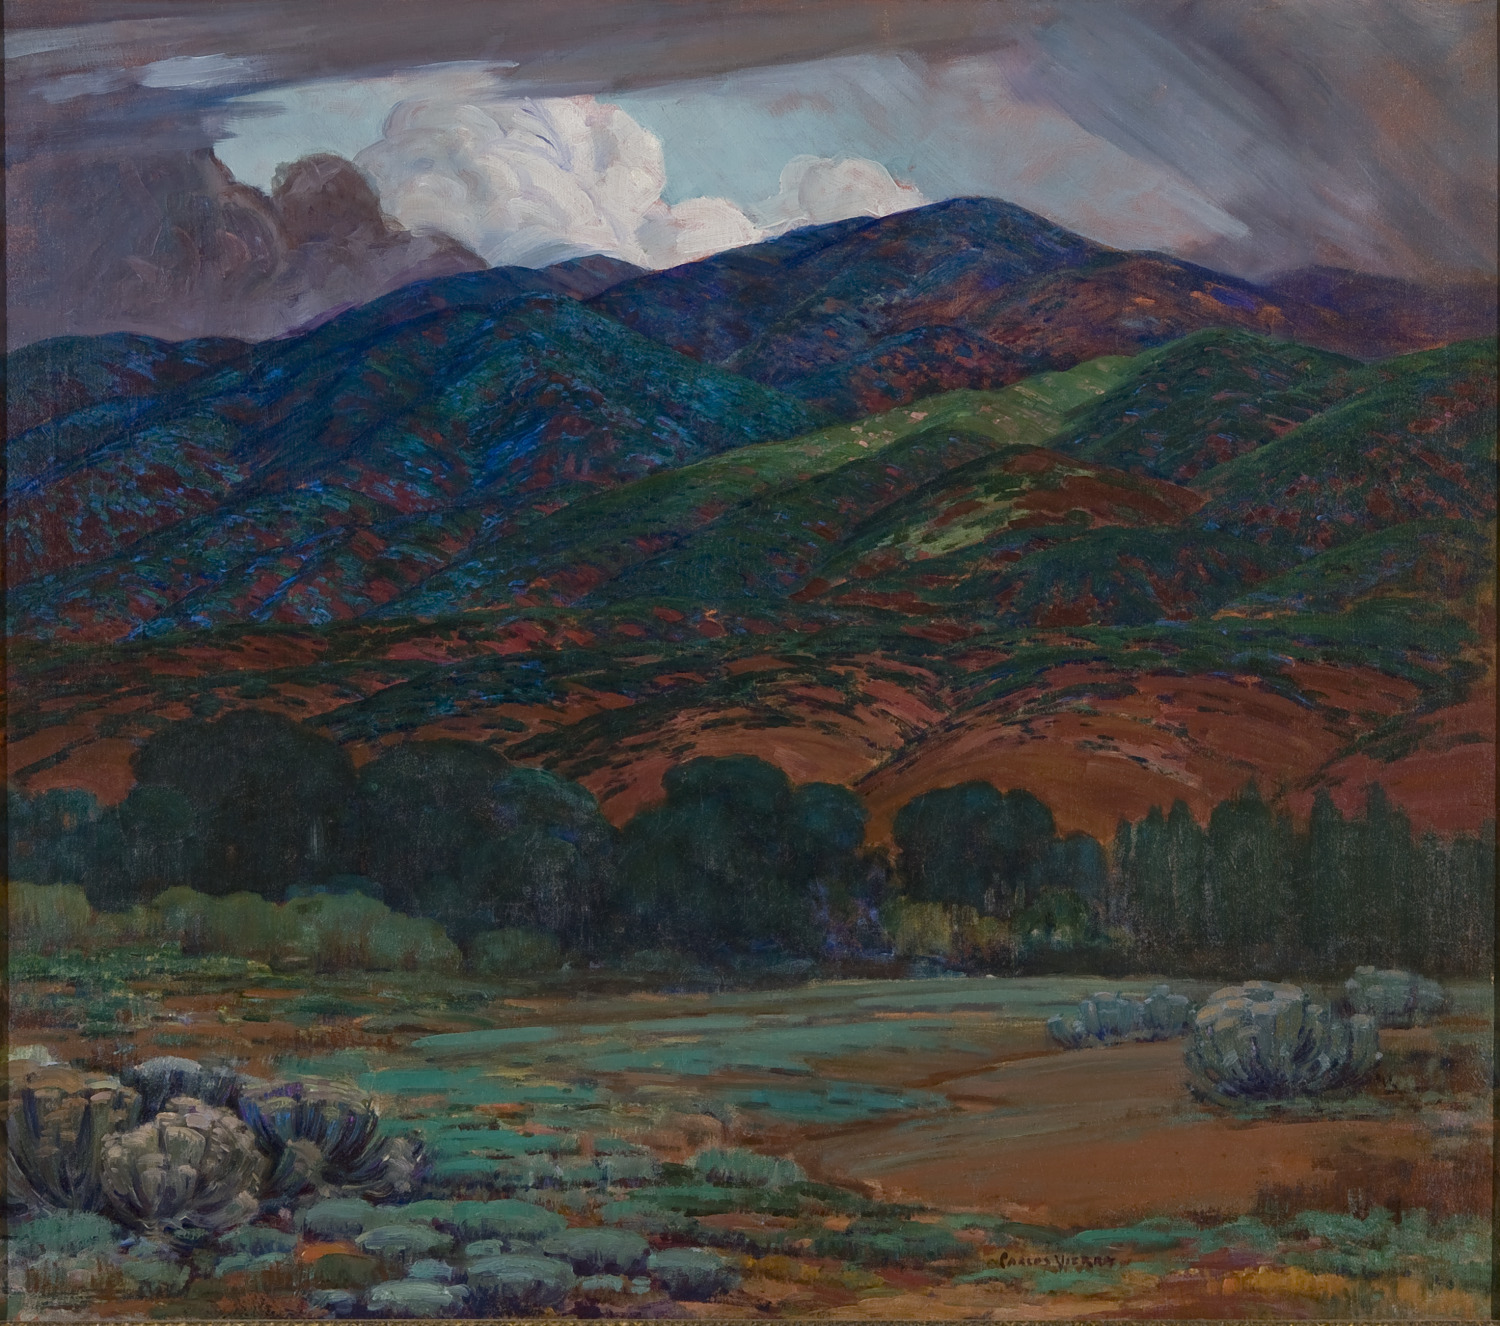 Carlos Vierra, Summer Rain (Lluvia de verano), c. 1920s. Oil on canvas. Museum purchase and gift of the Carl S. Dentzel Family Collection, by exchange.